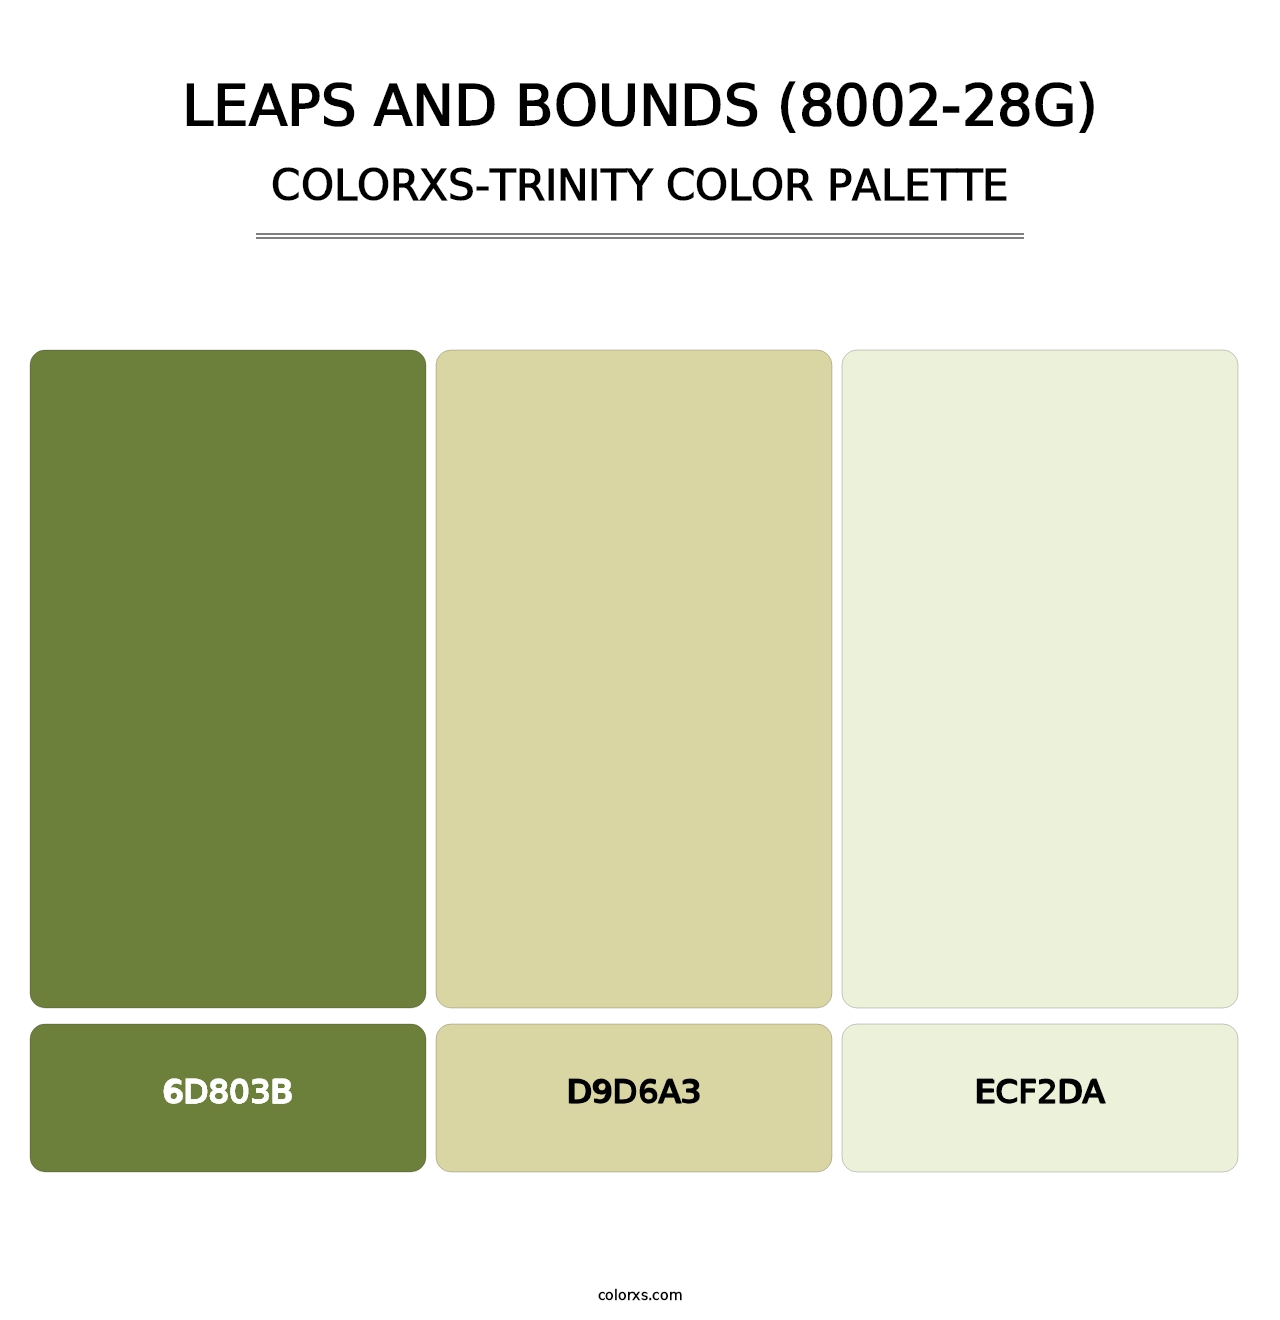 Leaps and Bounds (8002-28G) - Colorxs Trinity Palette